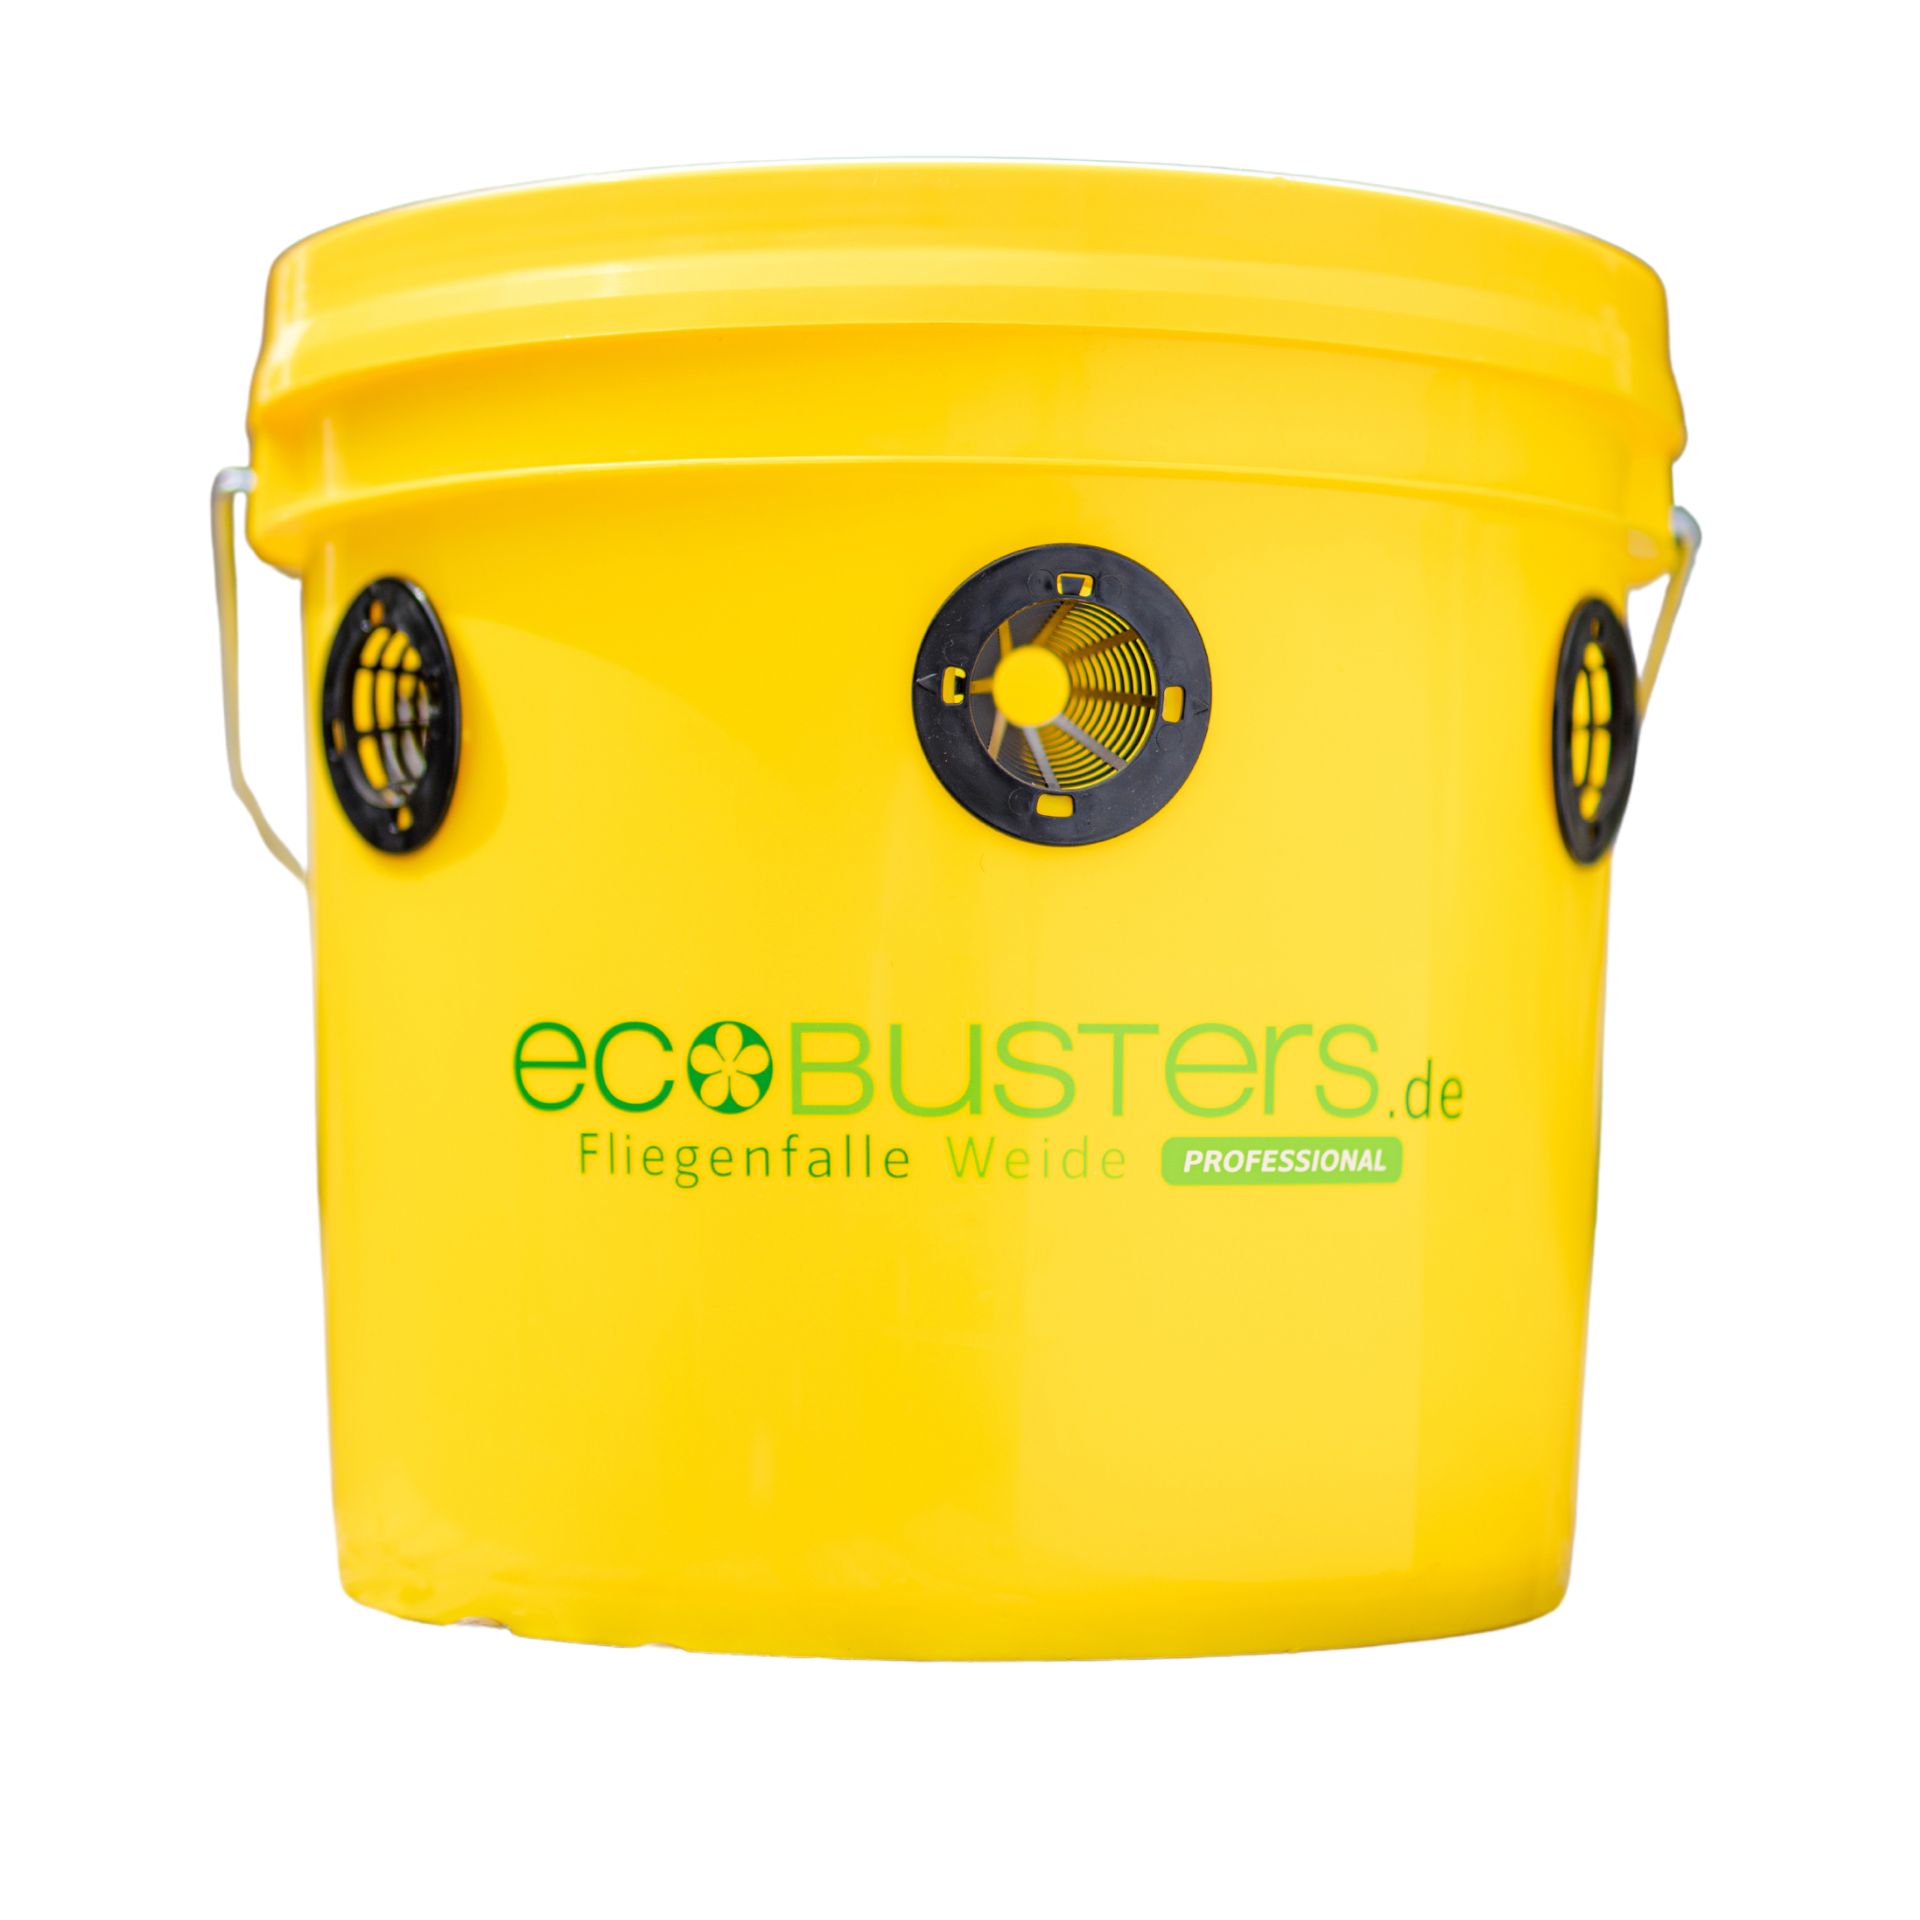 EcoBusters Fly Trap Set incl. Attractant